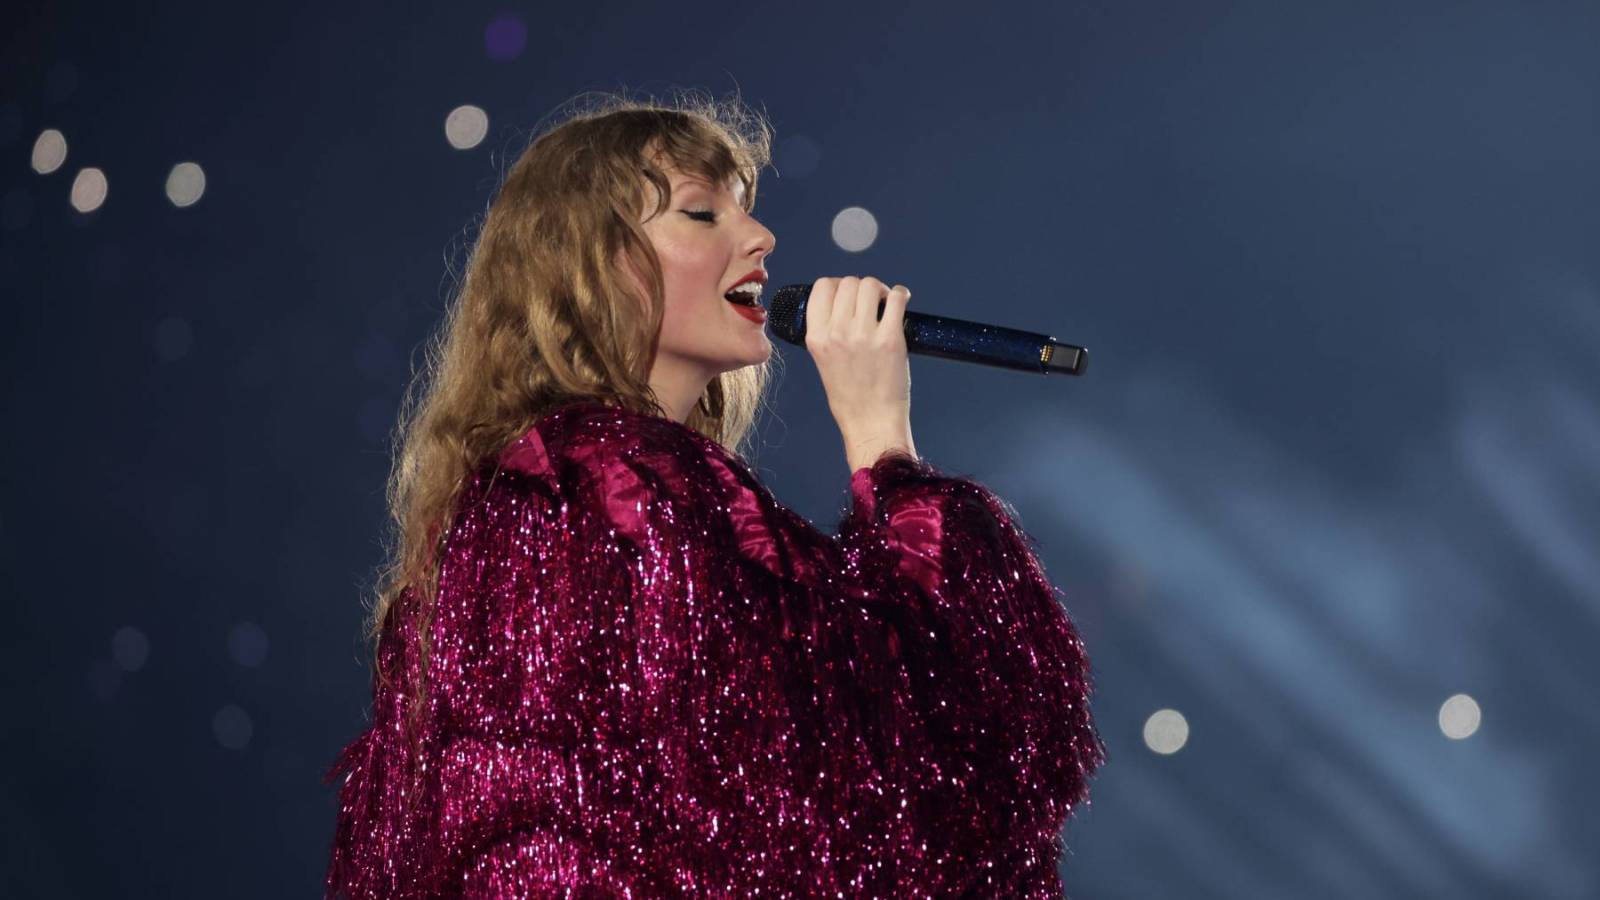 Taylor Swift Soundtracks The Five Stages of Grief With New Apple Music Playlists